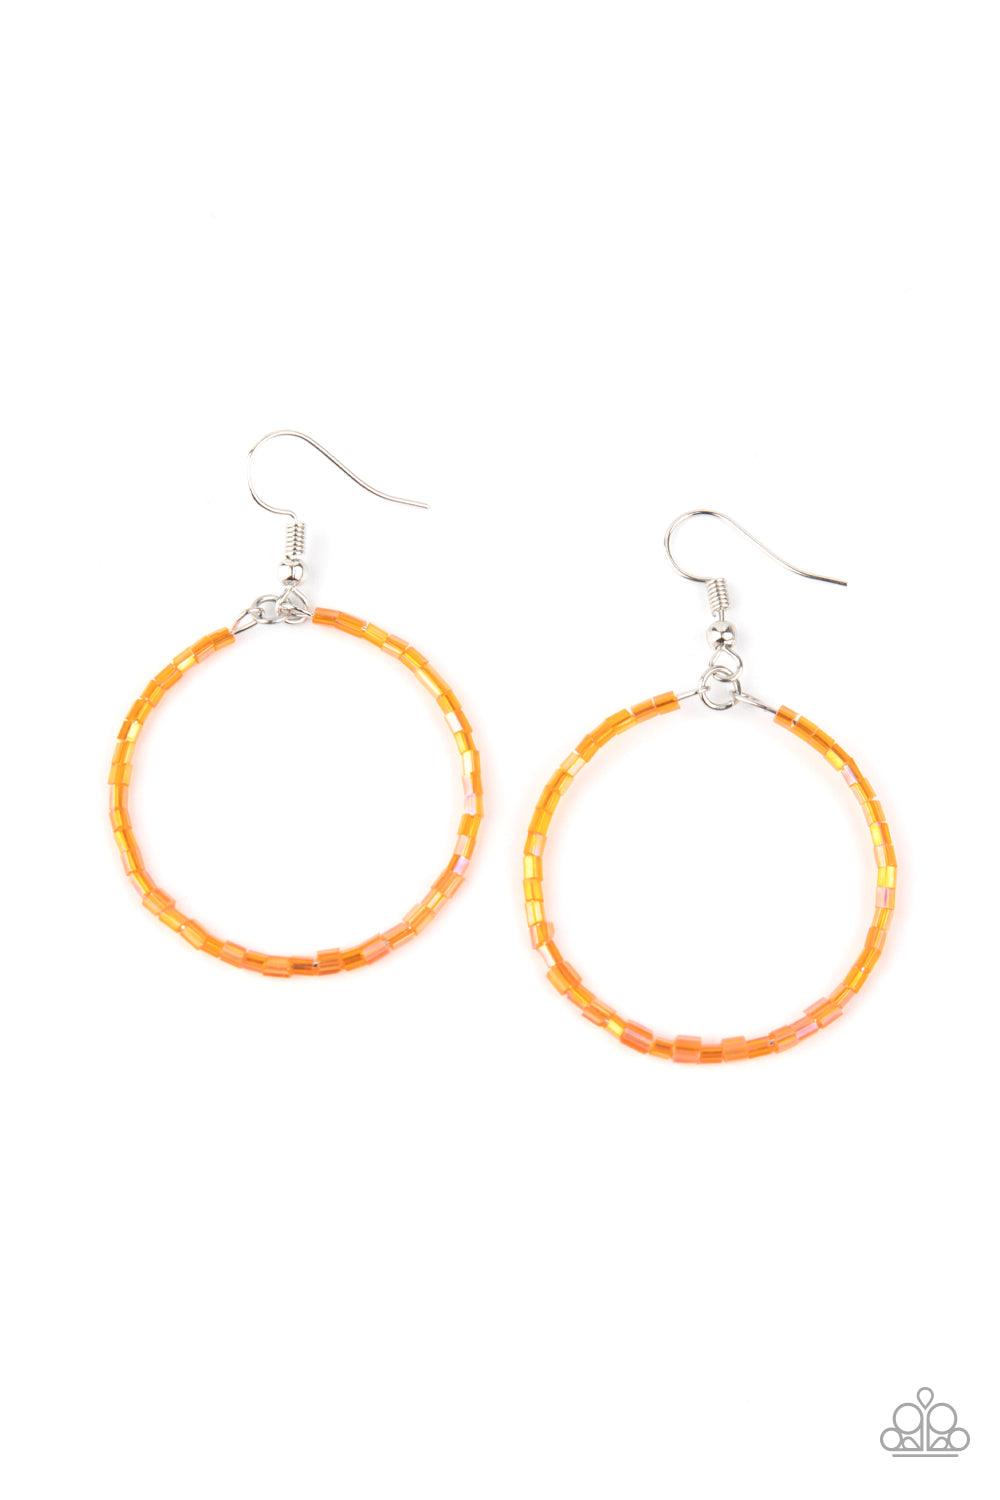 Paparazzi Accessories Colorfully Curvy - Orange Featuring an iridescent shimmer, glassy orange seed beads are threaded along a dainty wire hoop for a colorful finish. Earring attaches to a standard fishhook fitting. Sold as one pair of earrings. Jewelry